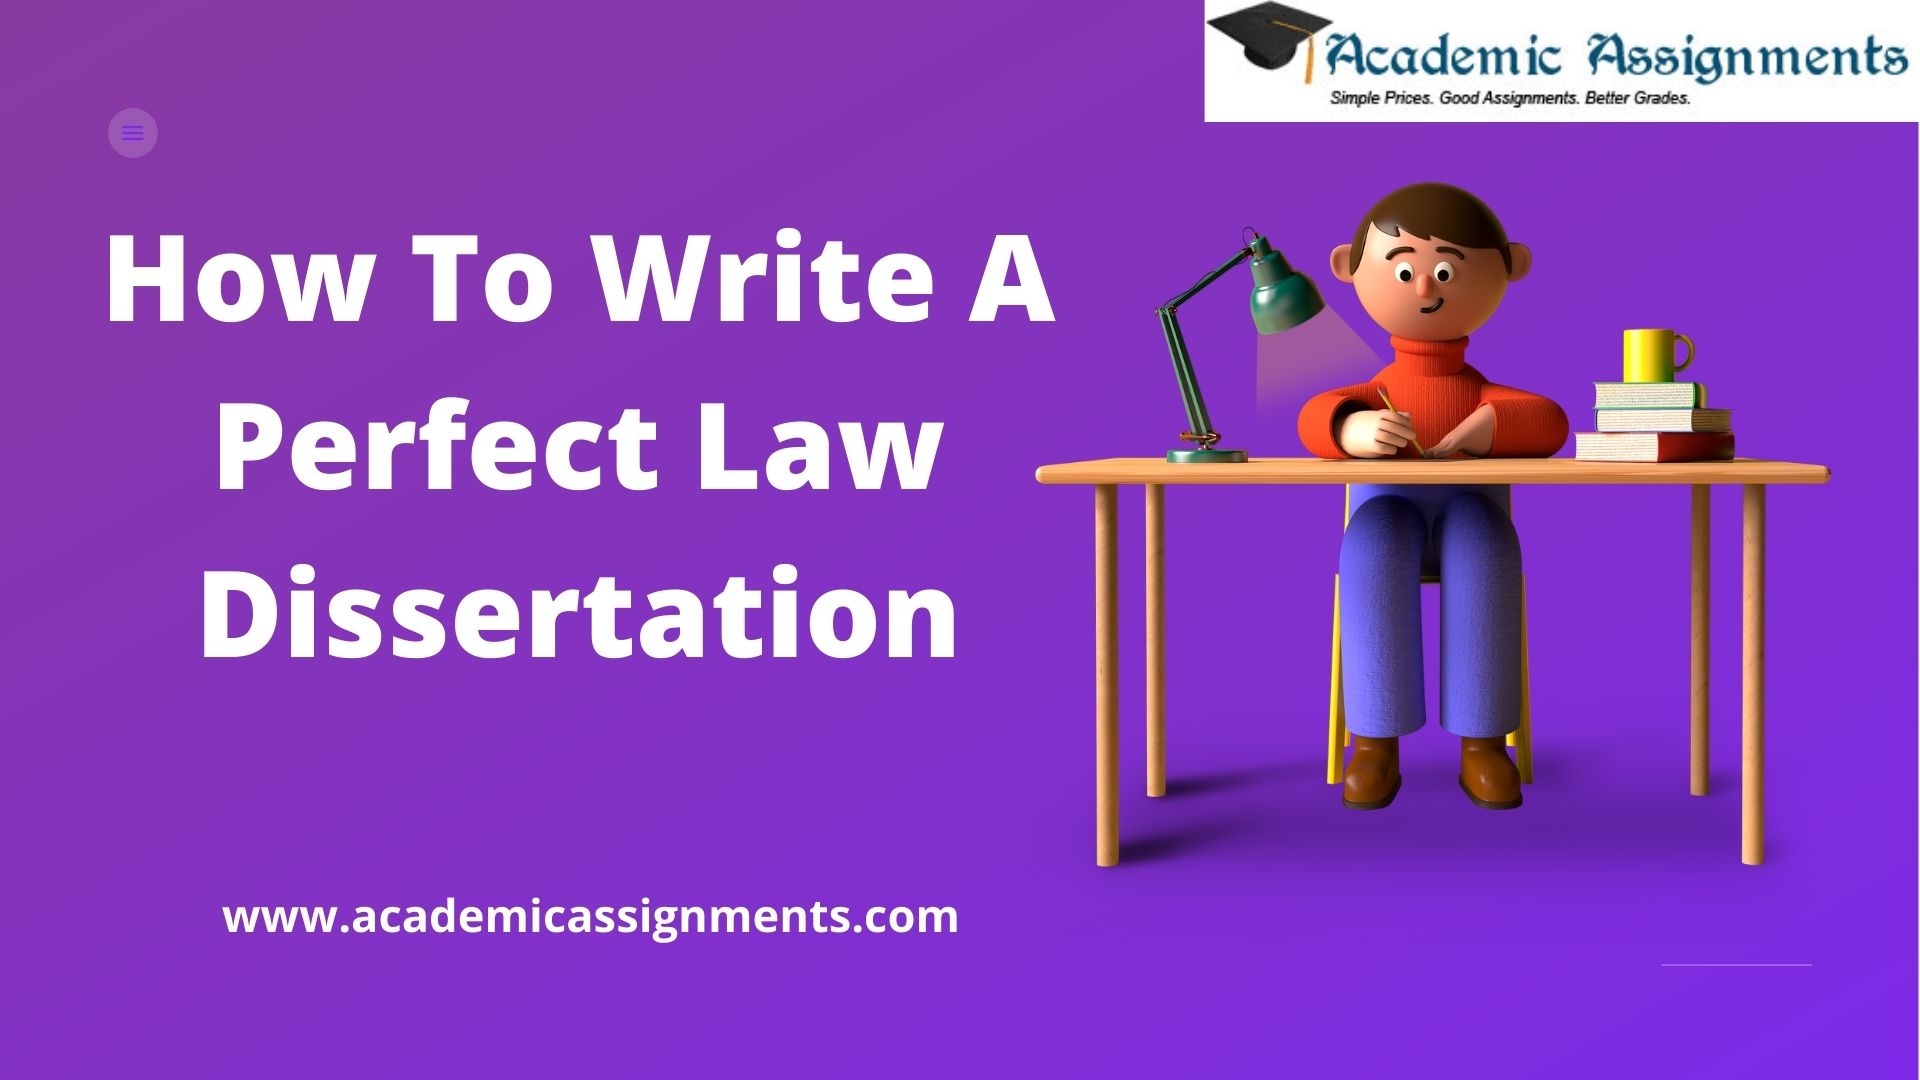 do you have to write a dissertation in law school